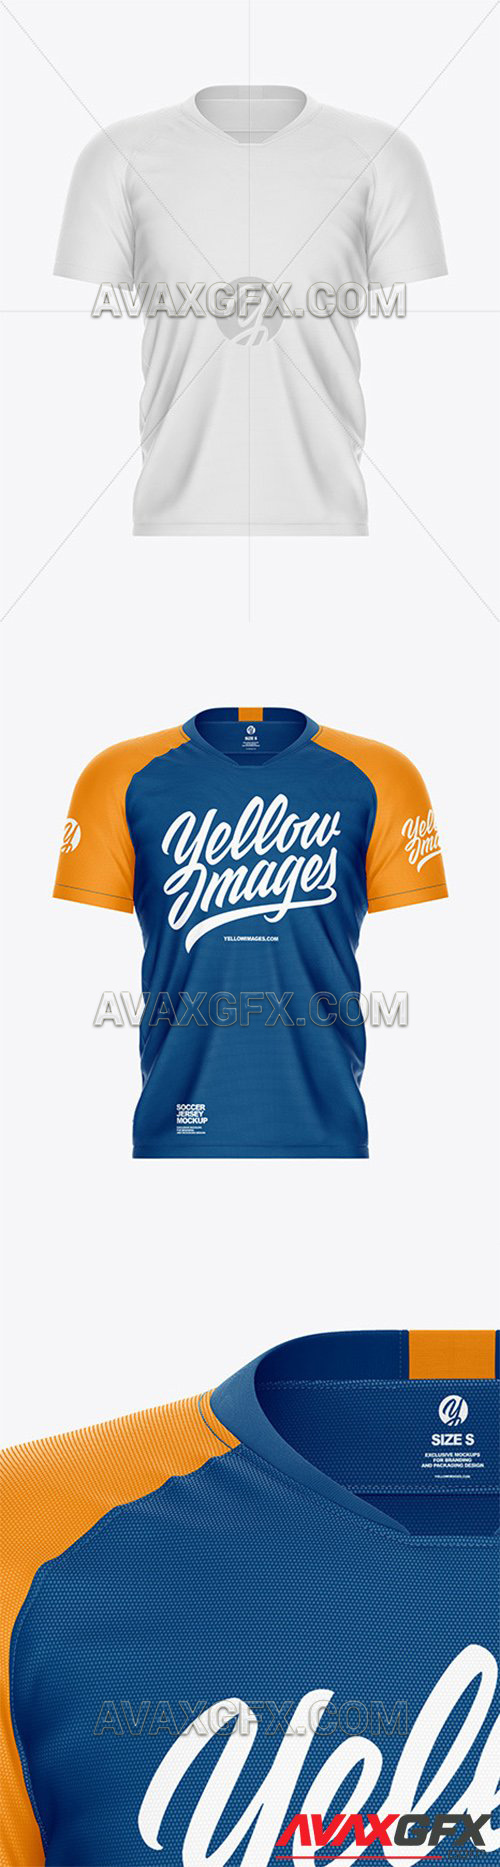 Men’s Soccer Jersey Mockup - Front View 57454